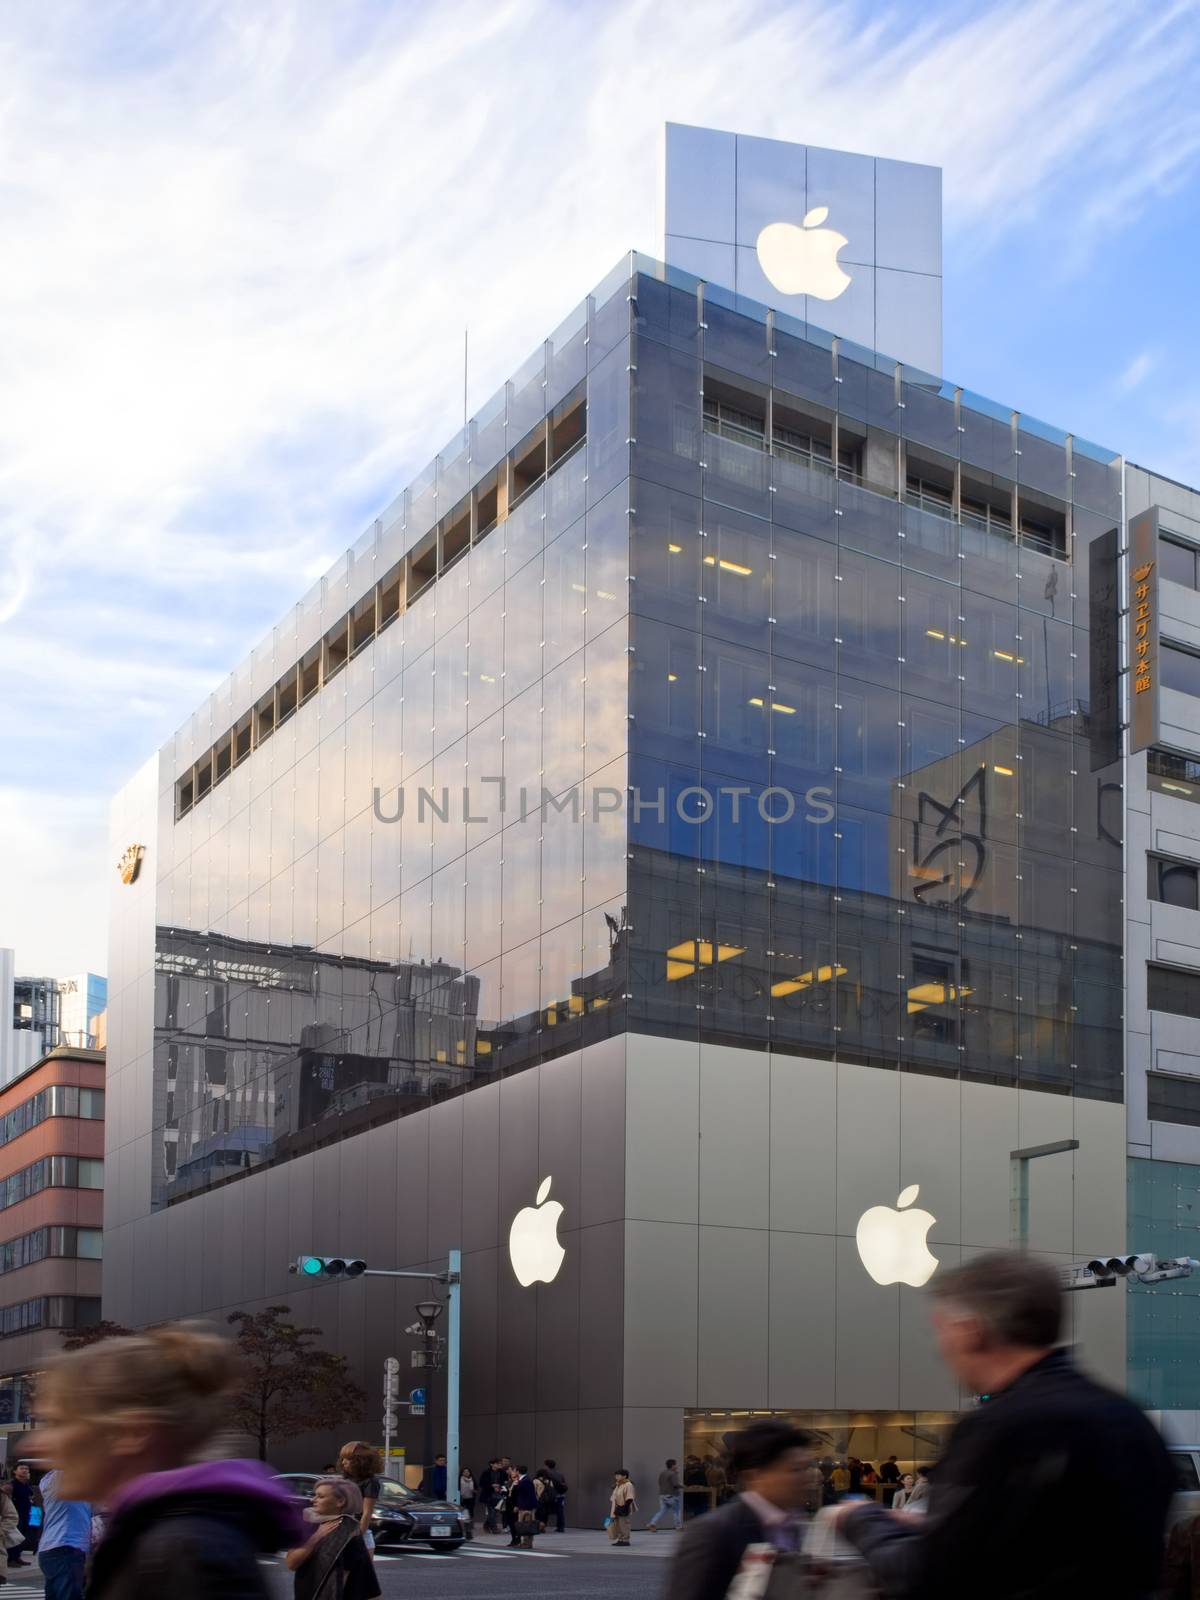 Ginza, Tokyo, Japan - November 12, 2015: The first dedicated Apple store outside the US caused quite a stir when it opened on the main street of Ginza district in 2003. It bustles with excited customers whenever a brand-new iPhone, iPod or MacBook is released.